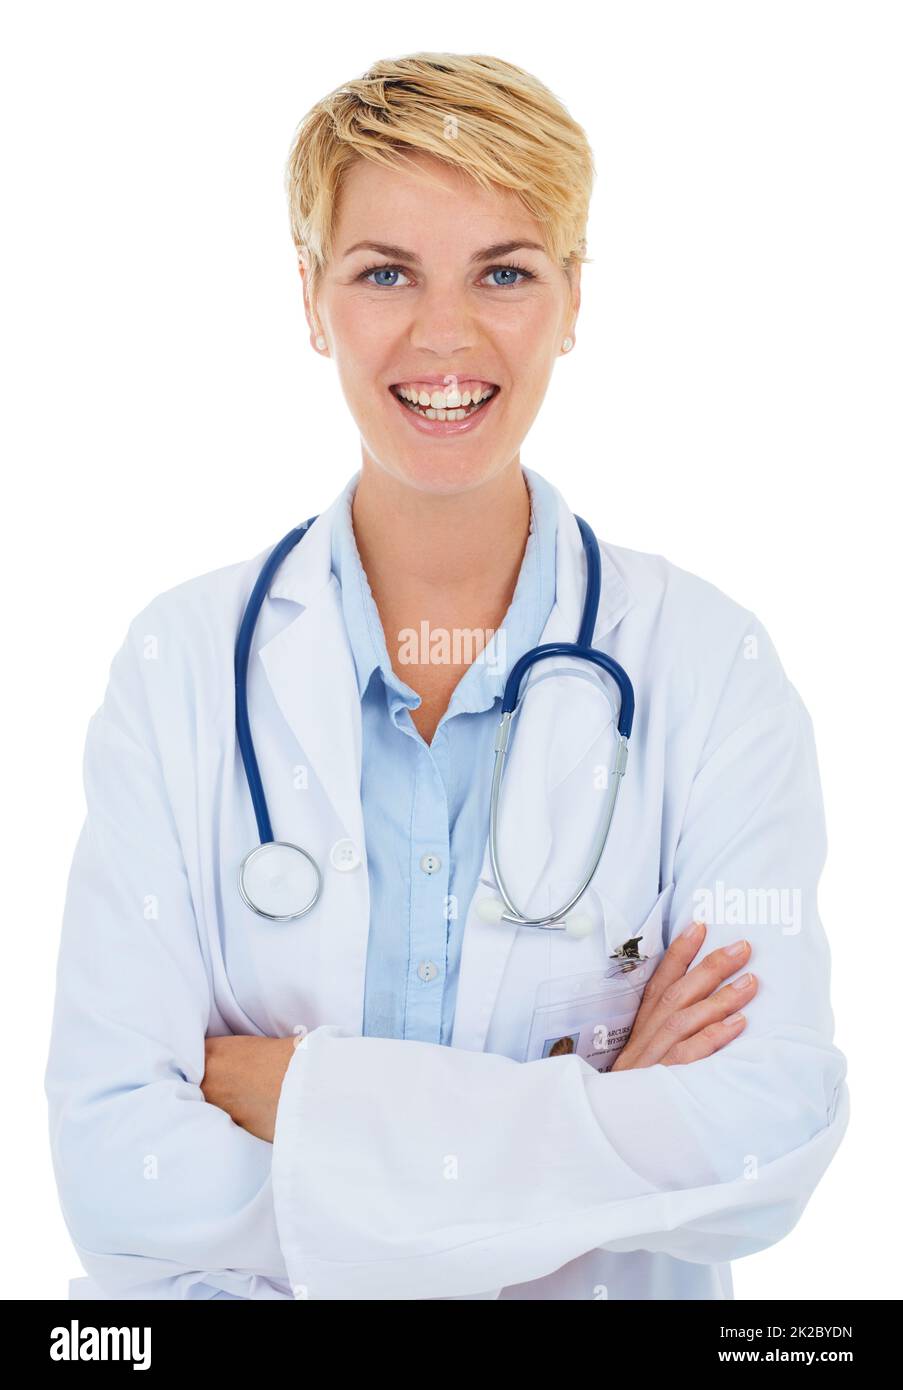 Shes the best in her field. A young female doctor standing against a white background. Stock Photo